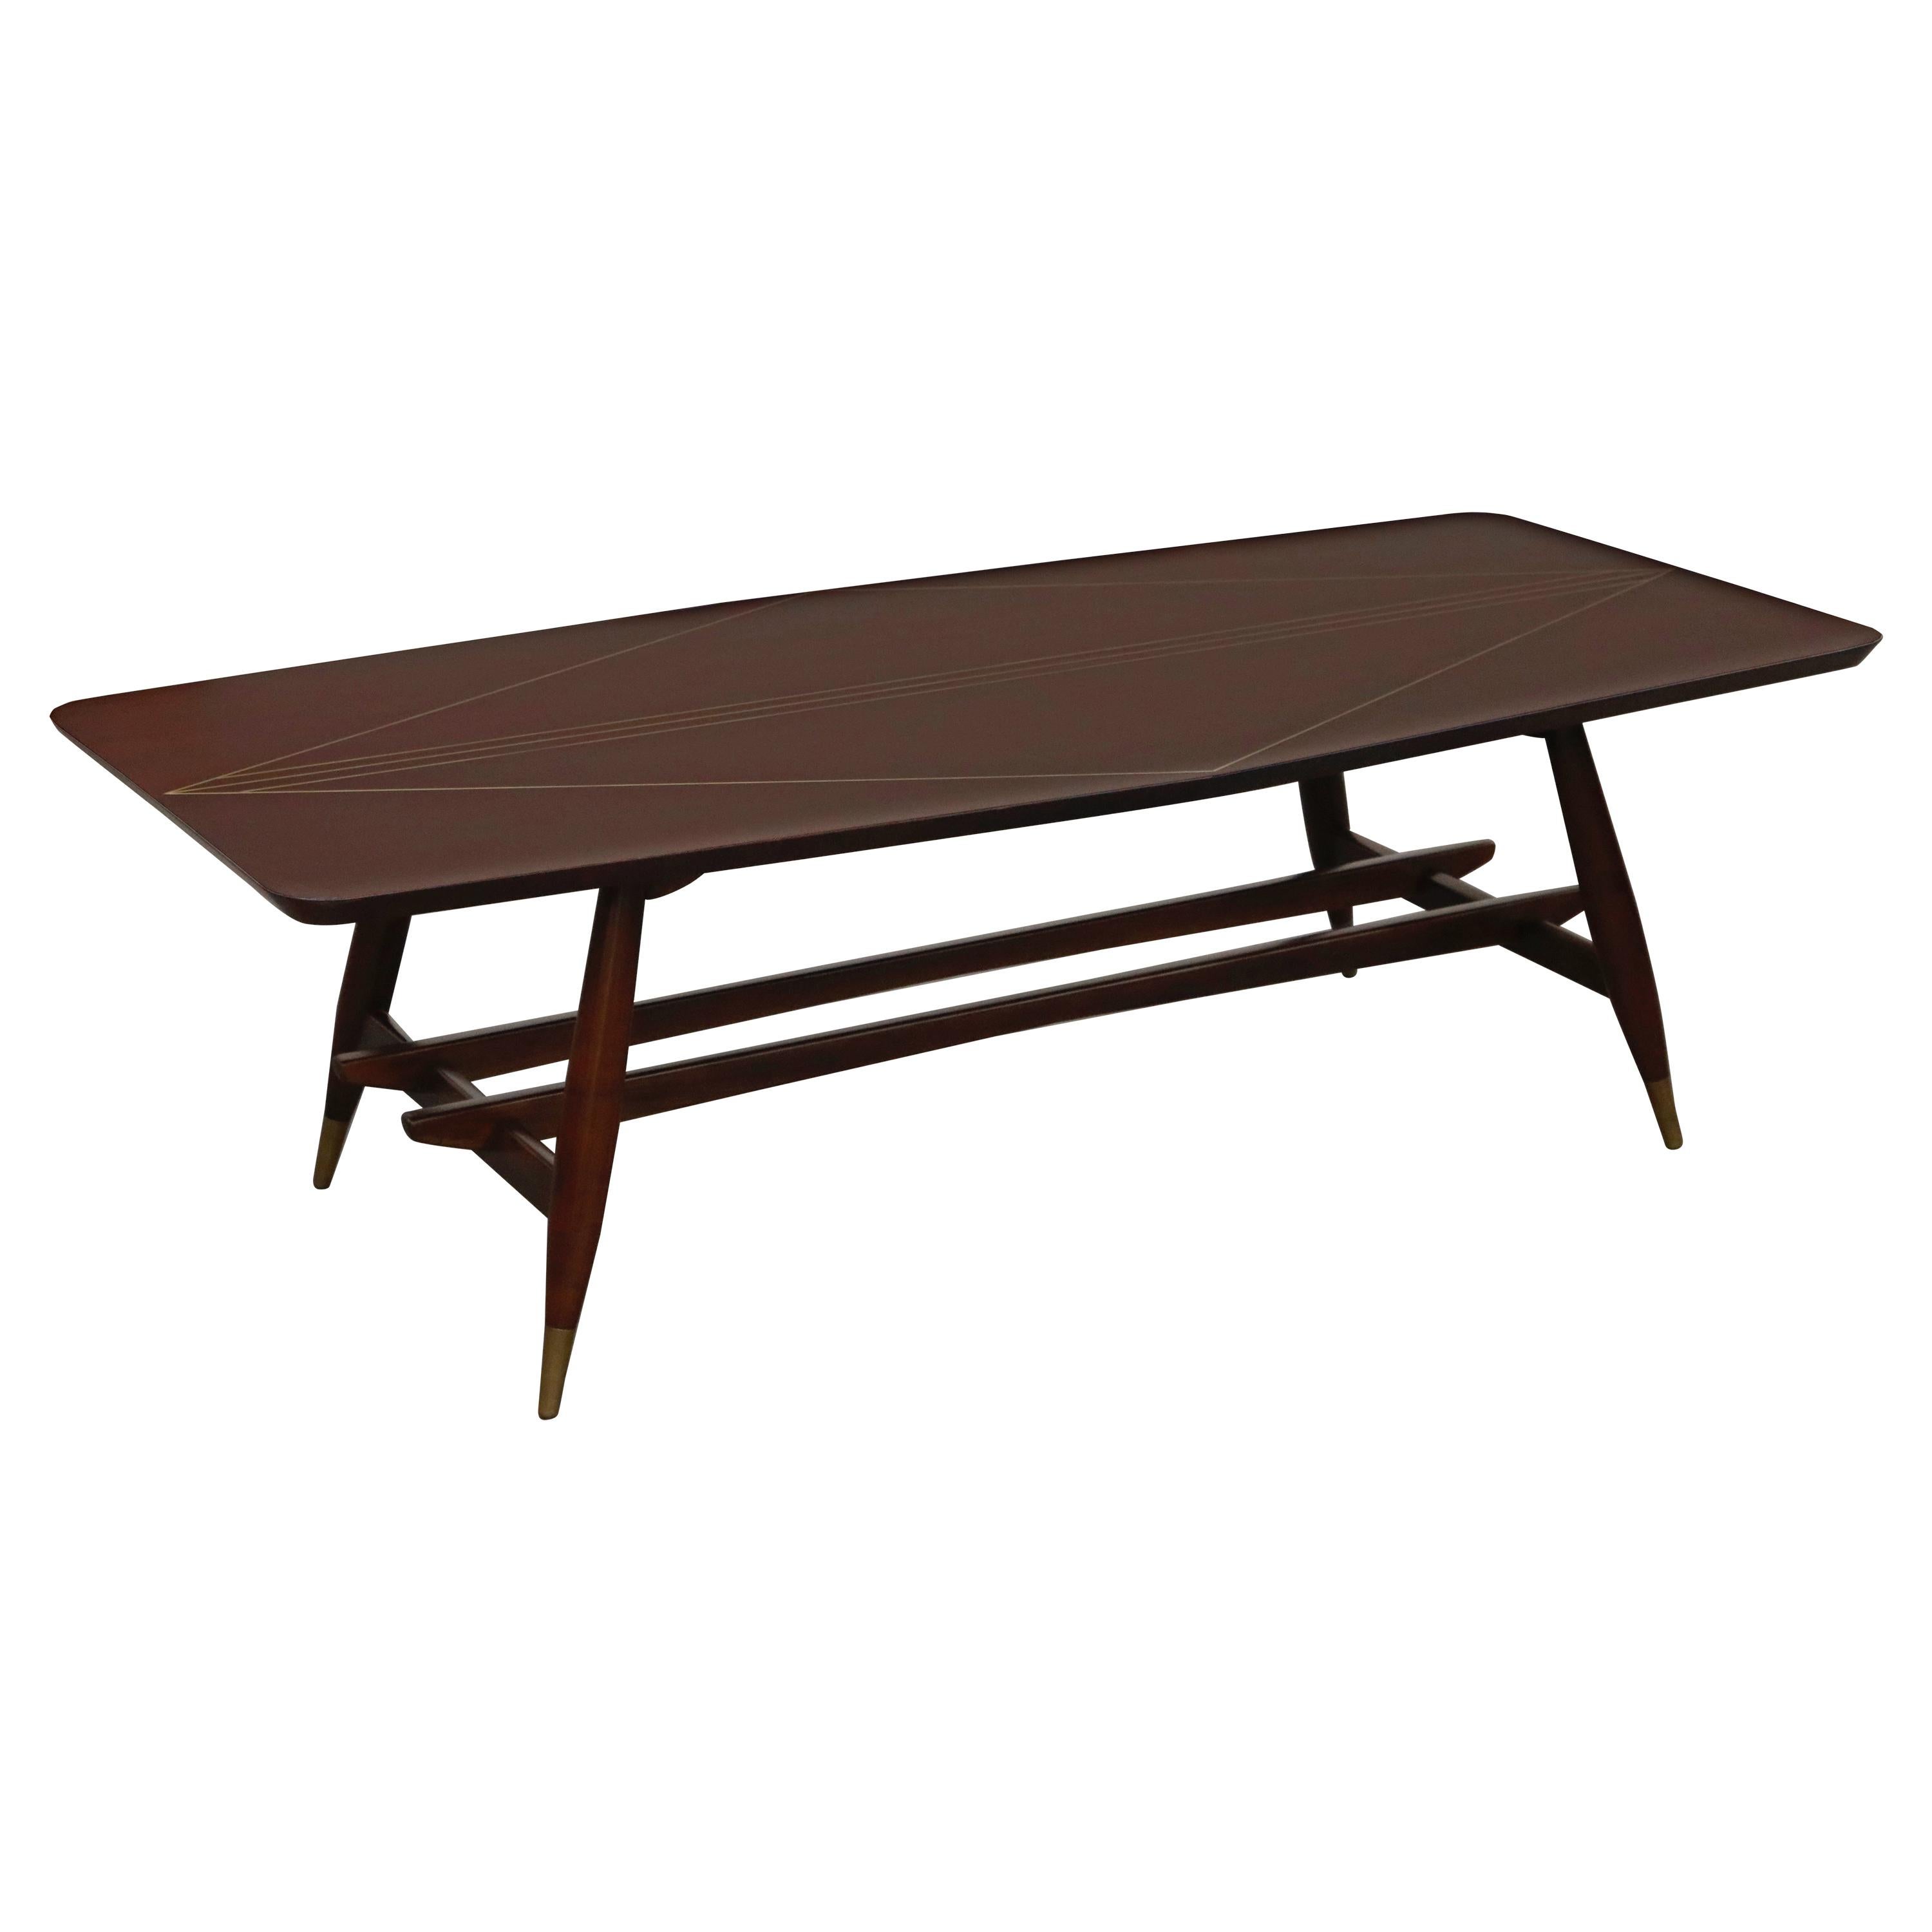 Frank Kyle Mexican Modern Mahogany and Brass Inlay Trestle Base Dining Table